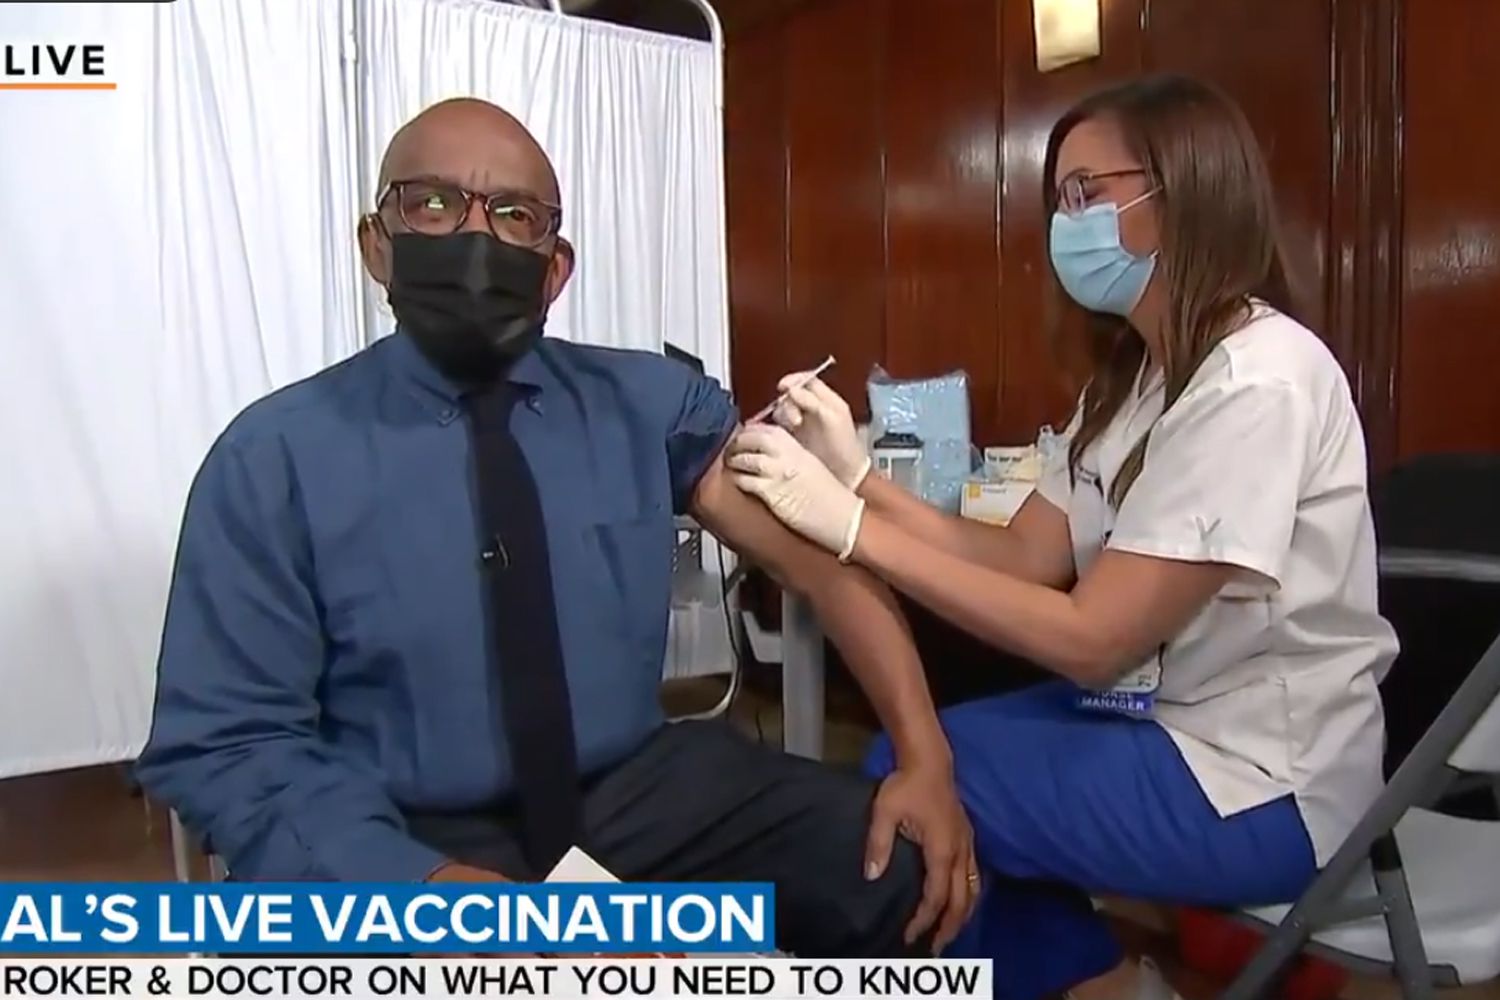 Al Roker gets his vaccine on the Today Show